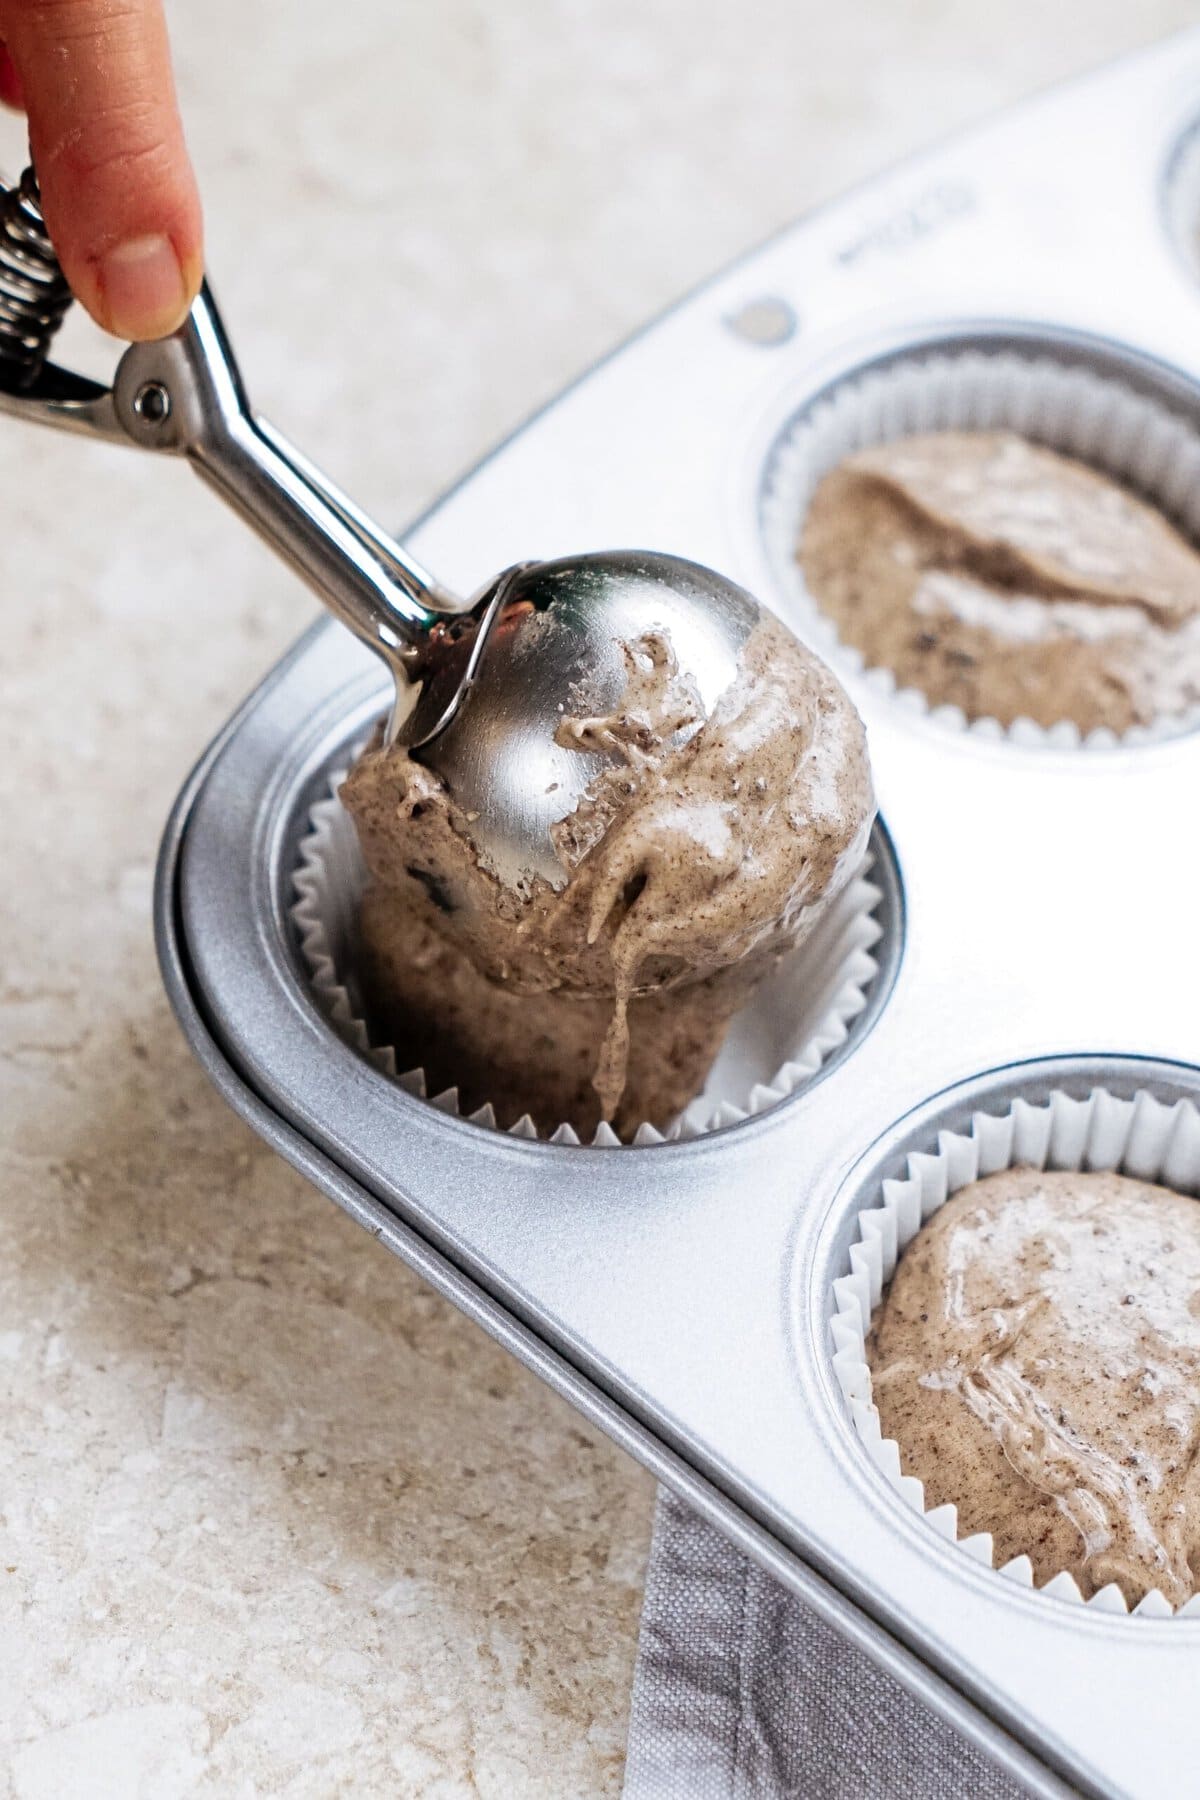 A metal scoop is used to place cupcake batter into white paper liners in a muffin tin.